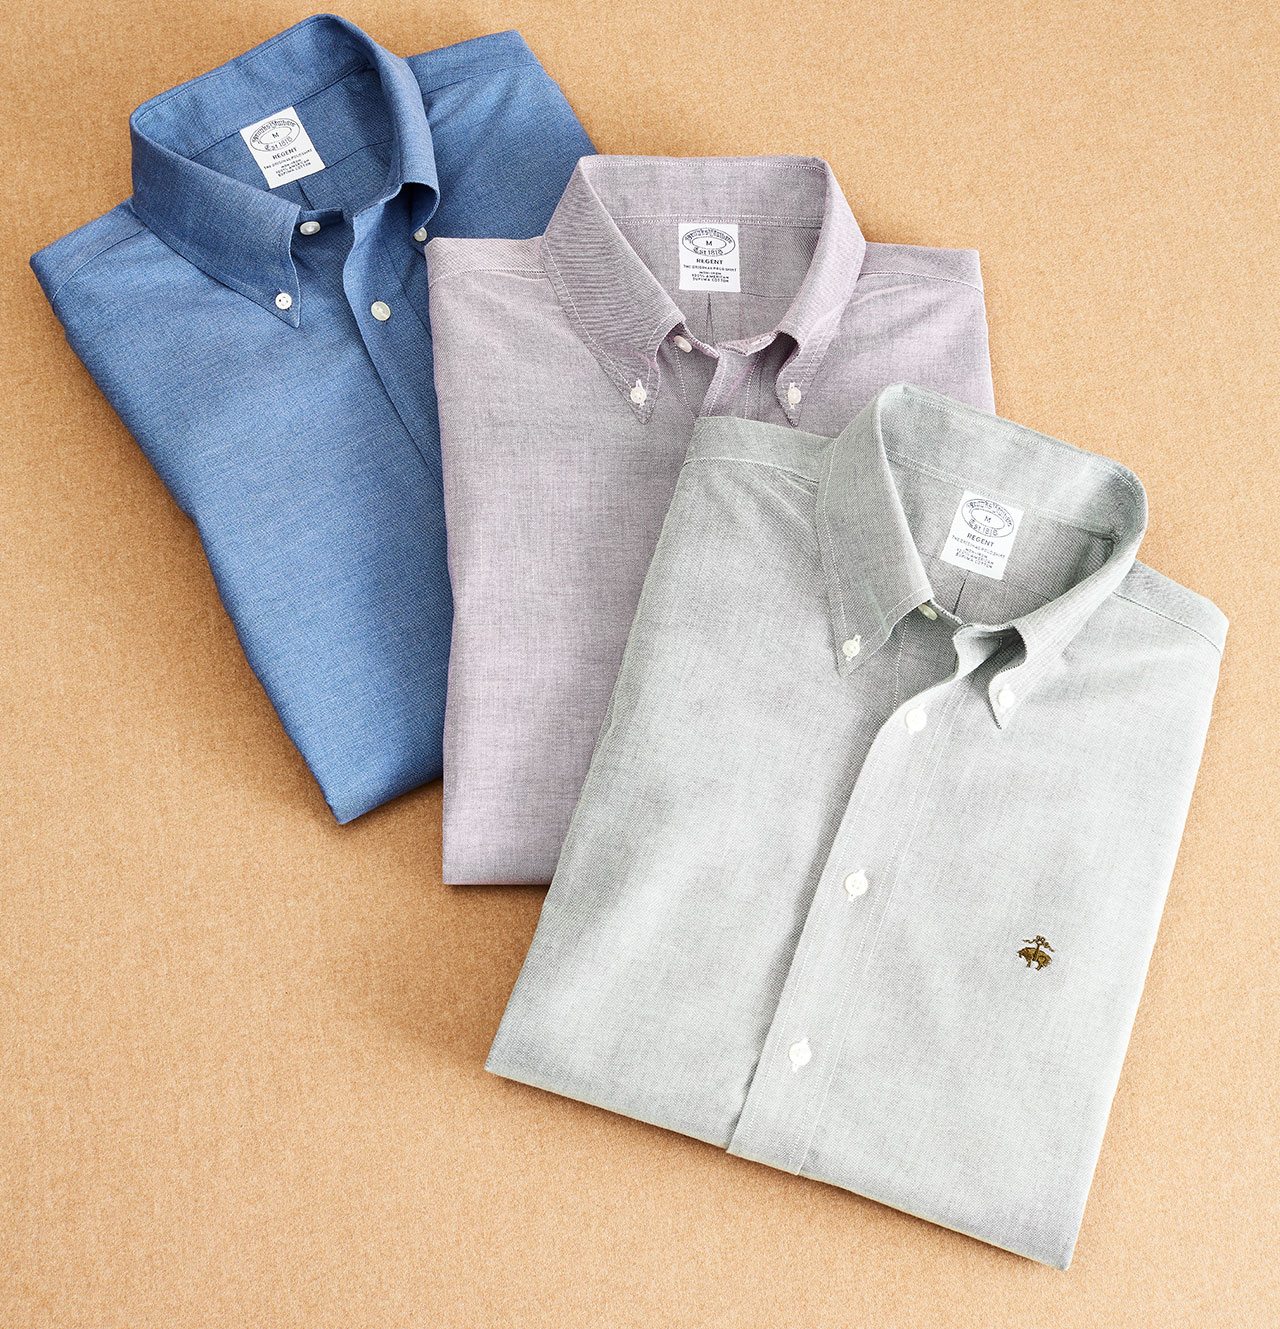 Good Sports - Keep your cool and your confidence in our new sport shirts, perfect for any day of the week